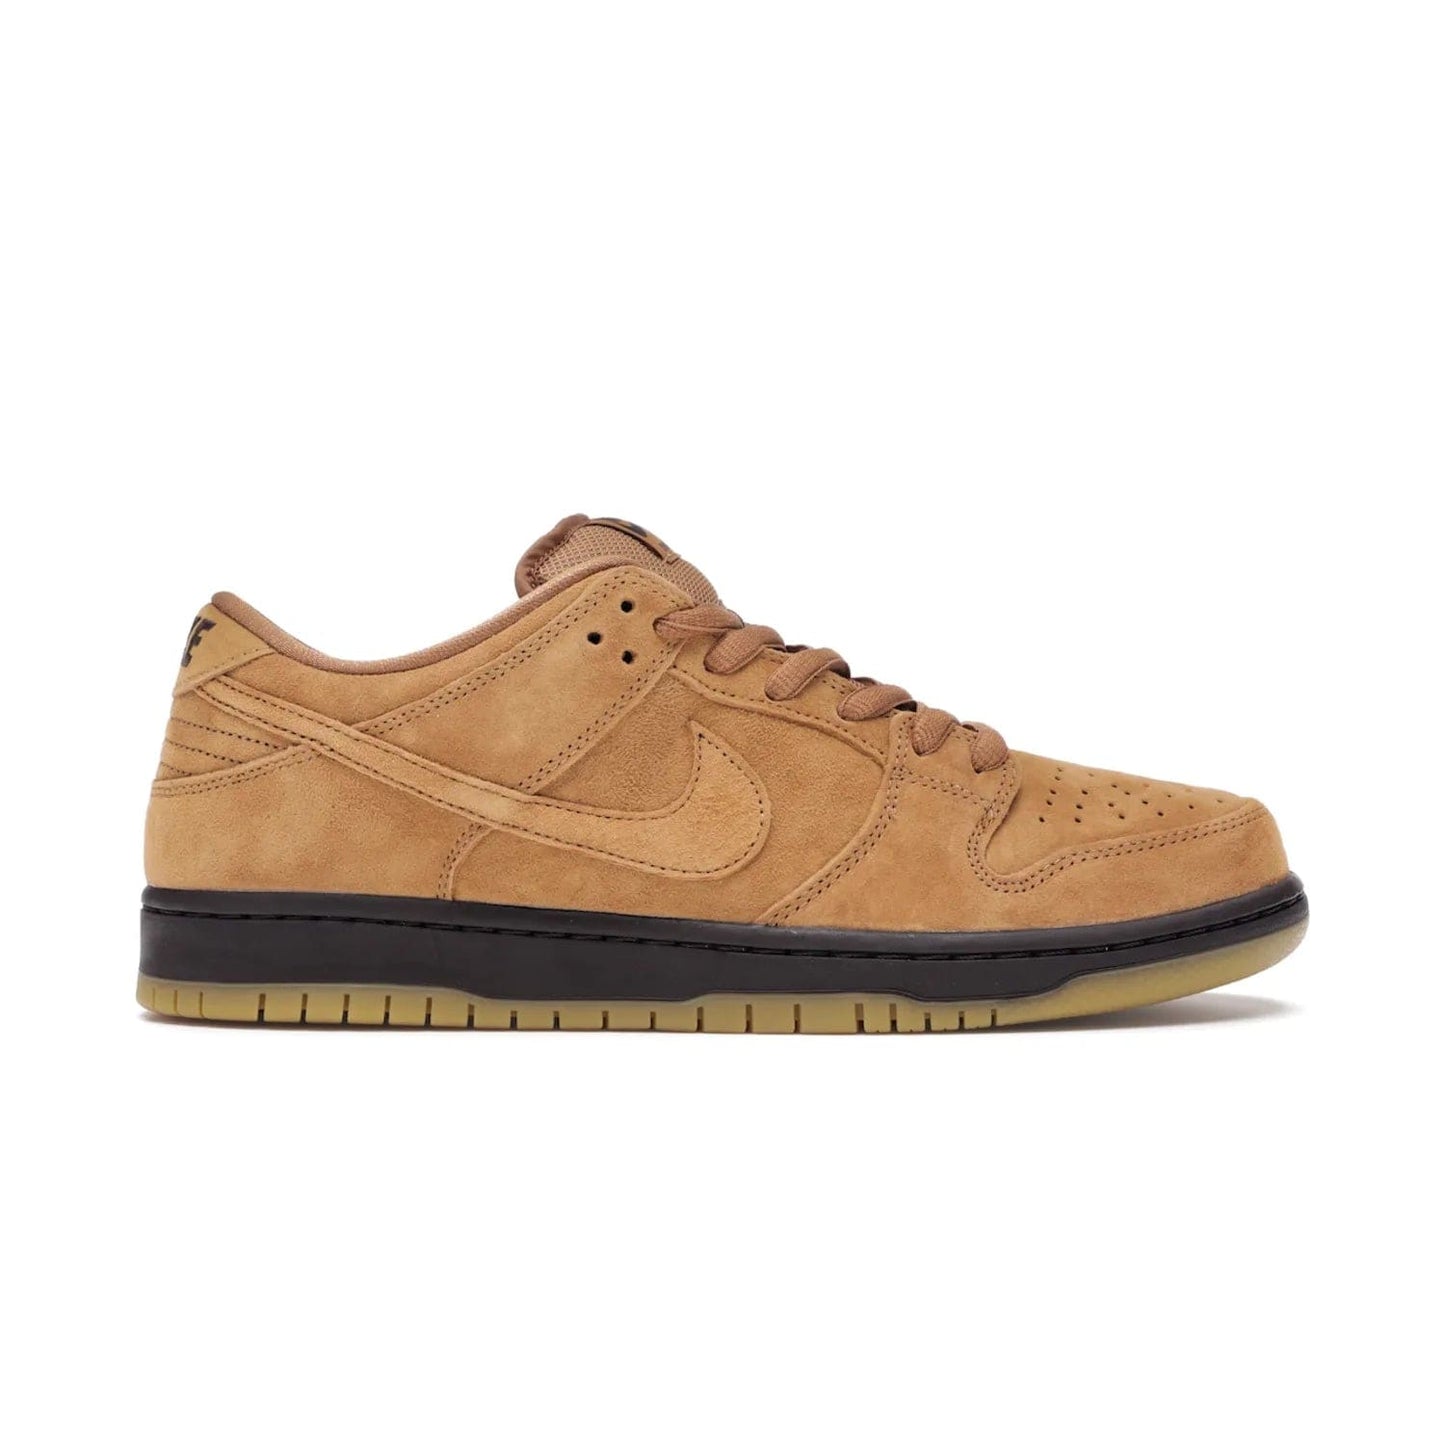 Nike SB Dunk Low Wheat (2021/2023) - Image 1 - Only at www.BallersClubKickz.com - The Nike SB Dunk Low Wheat (2021/2023)has a sleek silhouette and wheat suede upper. Tan tones for lining, mesh tongues, and laces. Iconic color palette midsole, perforated boxing toe. Brown branding on tongue and heel. Gum rubber outsole with partitioned pattern for traction. Eschewed in Feb 2021 for $110.